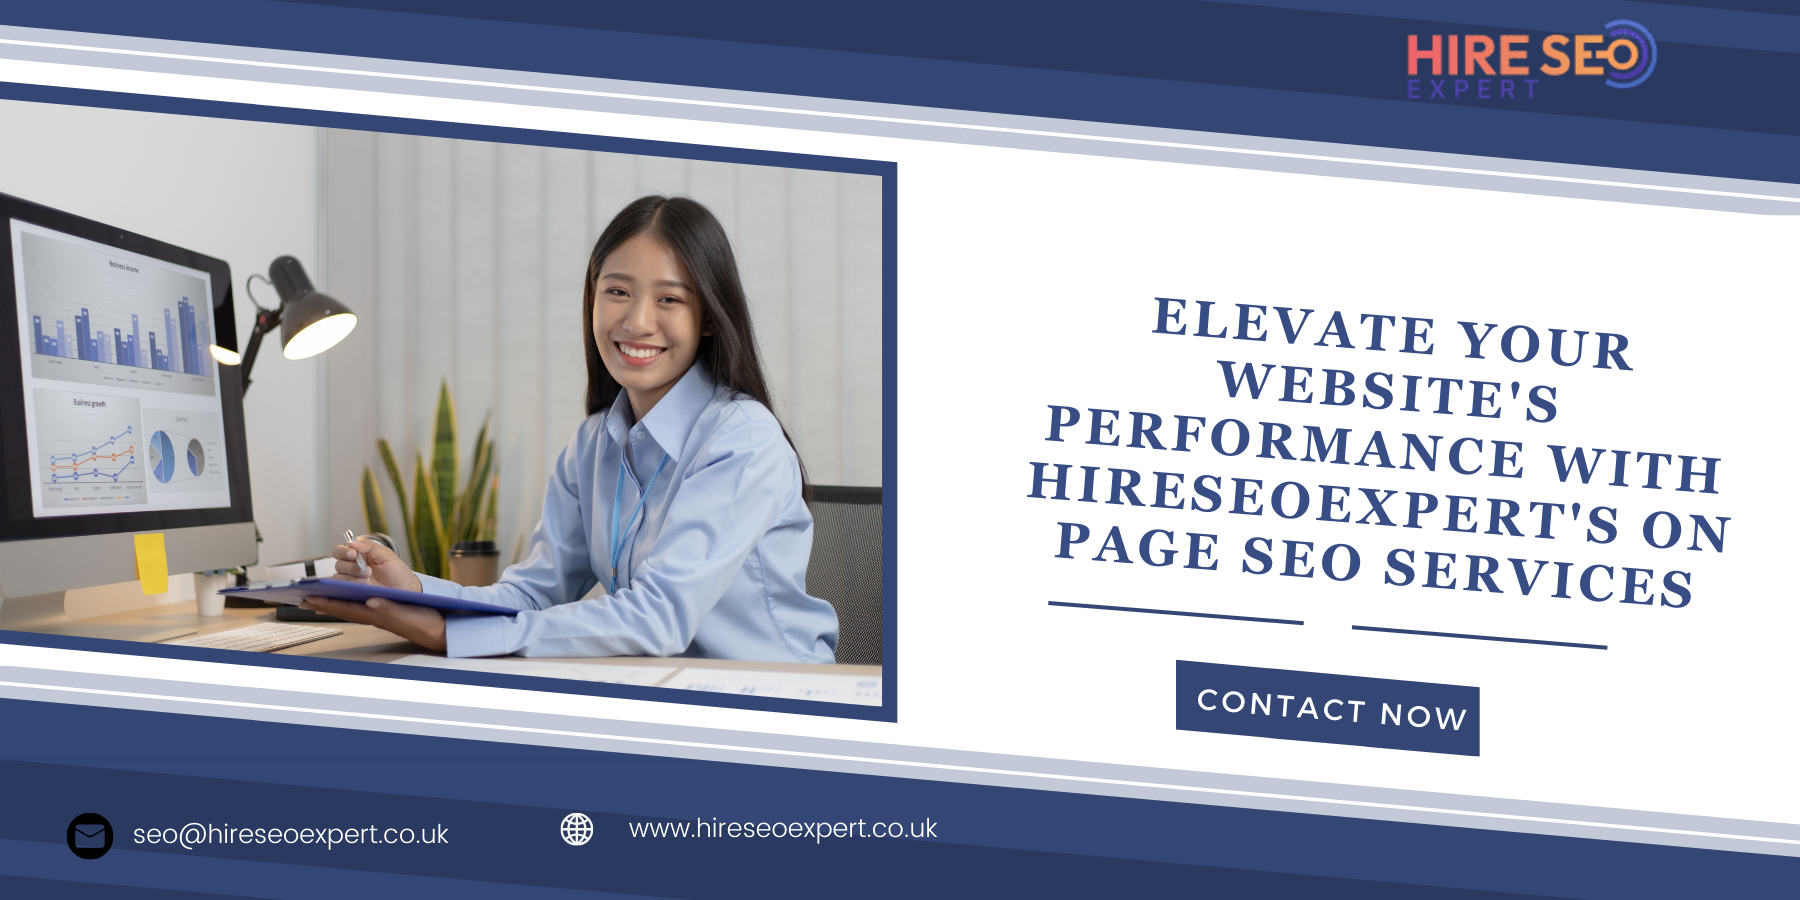 Elevate Your Website's Performance with Hireseoexpert's On Page SEO Services